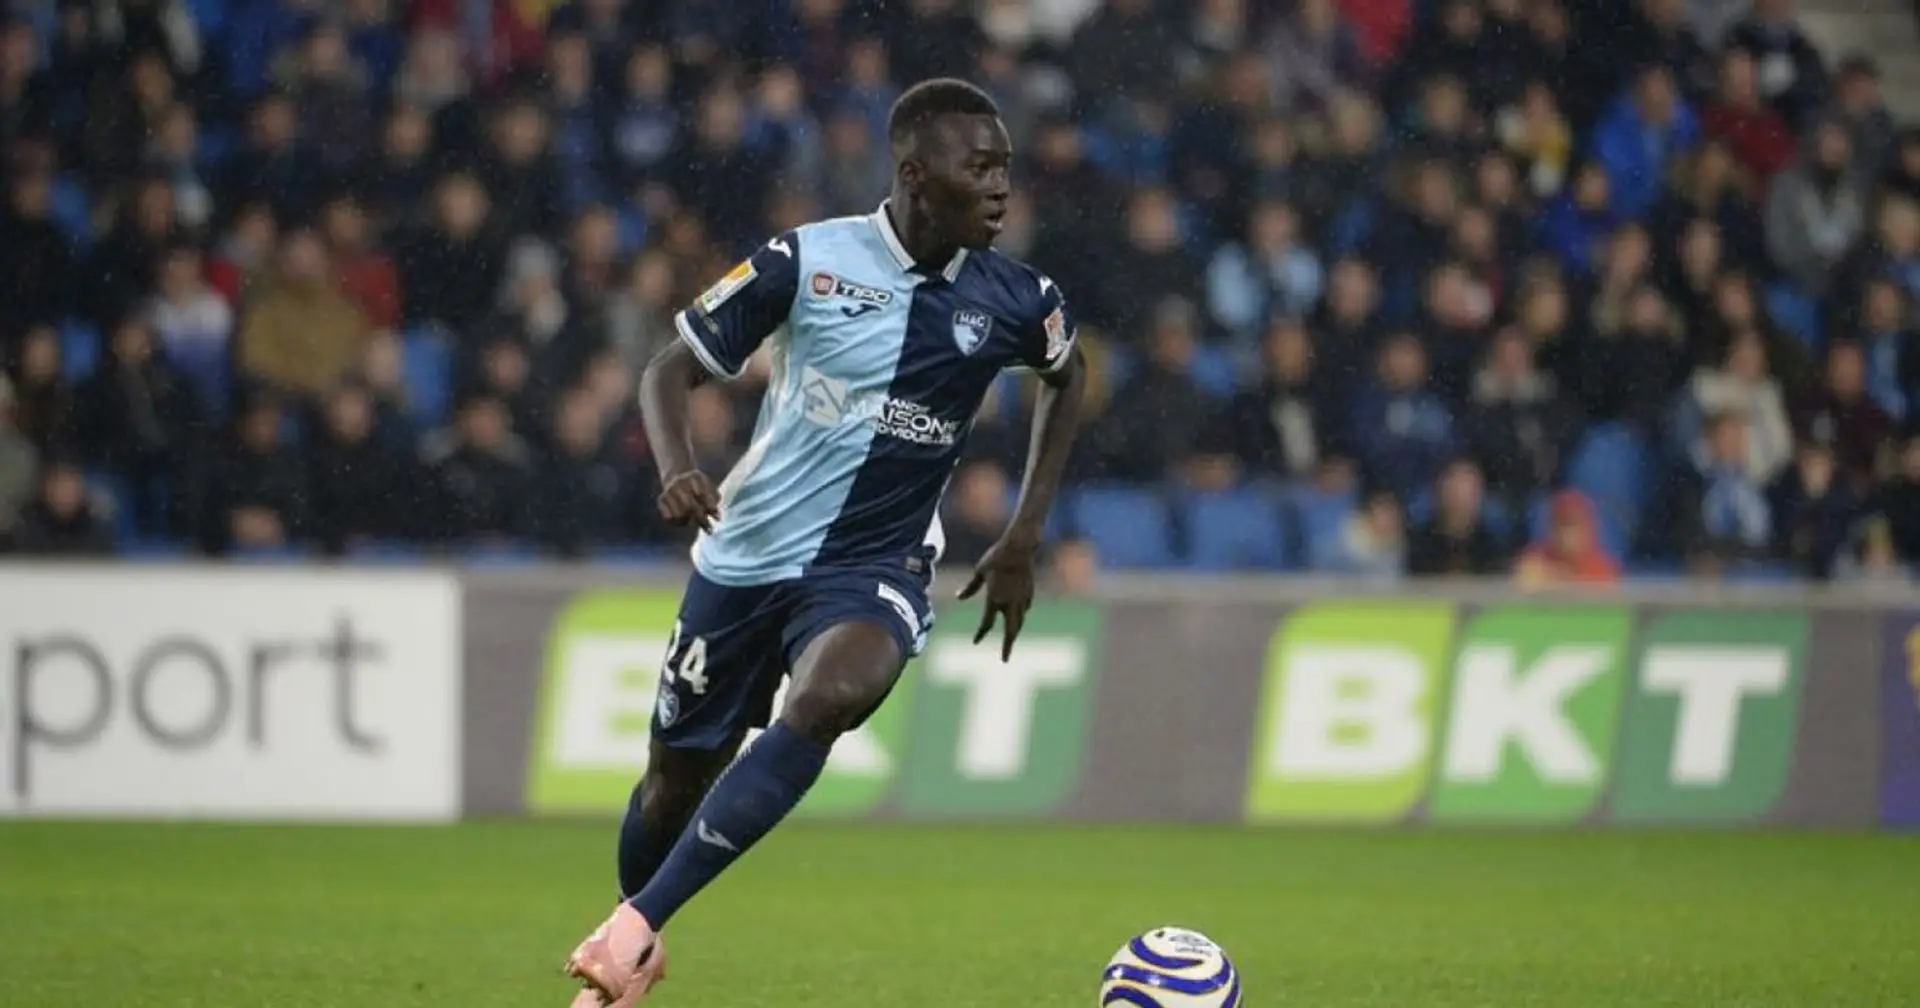 Arsenal miss out on yet another transfer target as Watford confirm signing of Pape Gueye